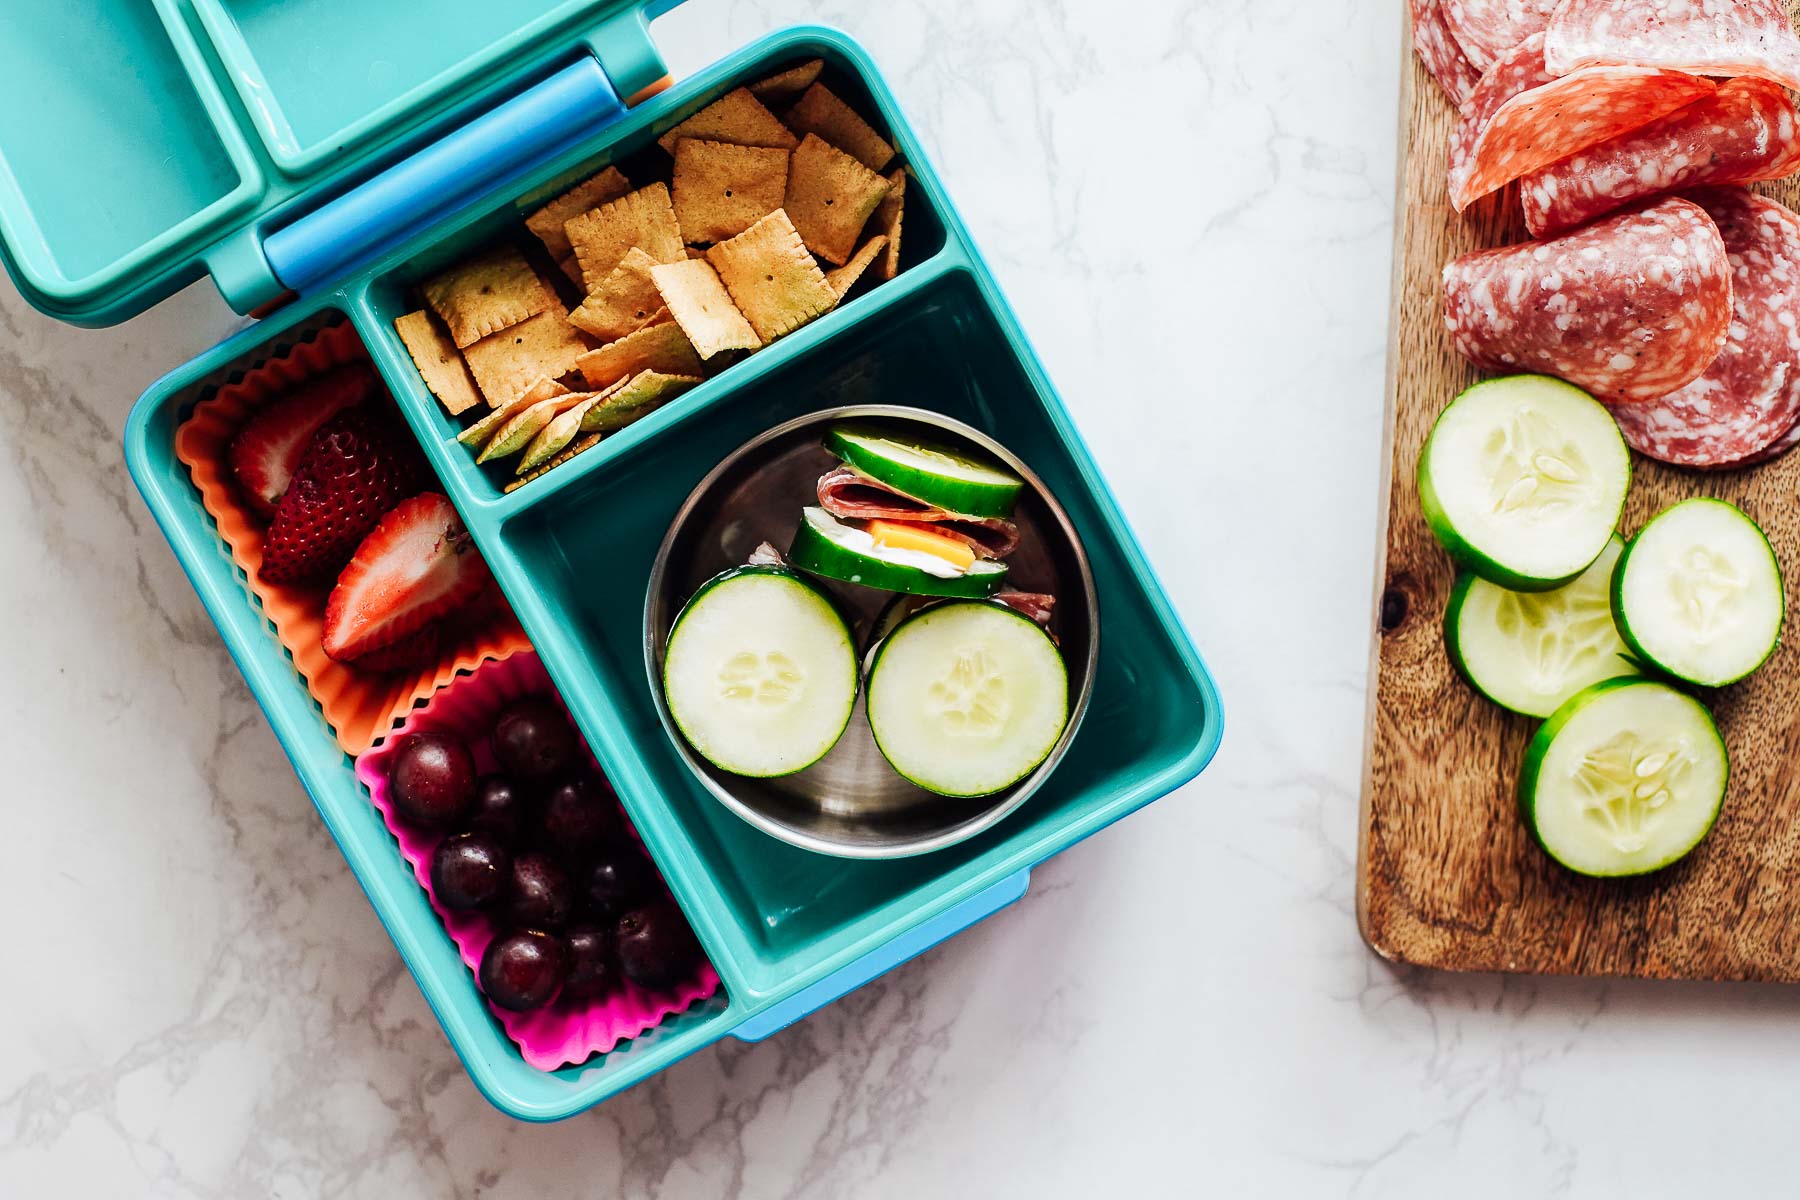 Cucumber slices with cheese and cream cheese and salami, crackers, grapes, and berries in a lunchbox.